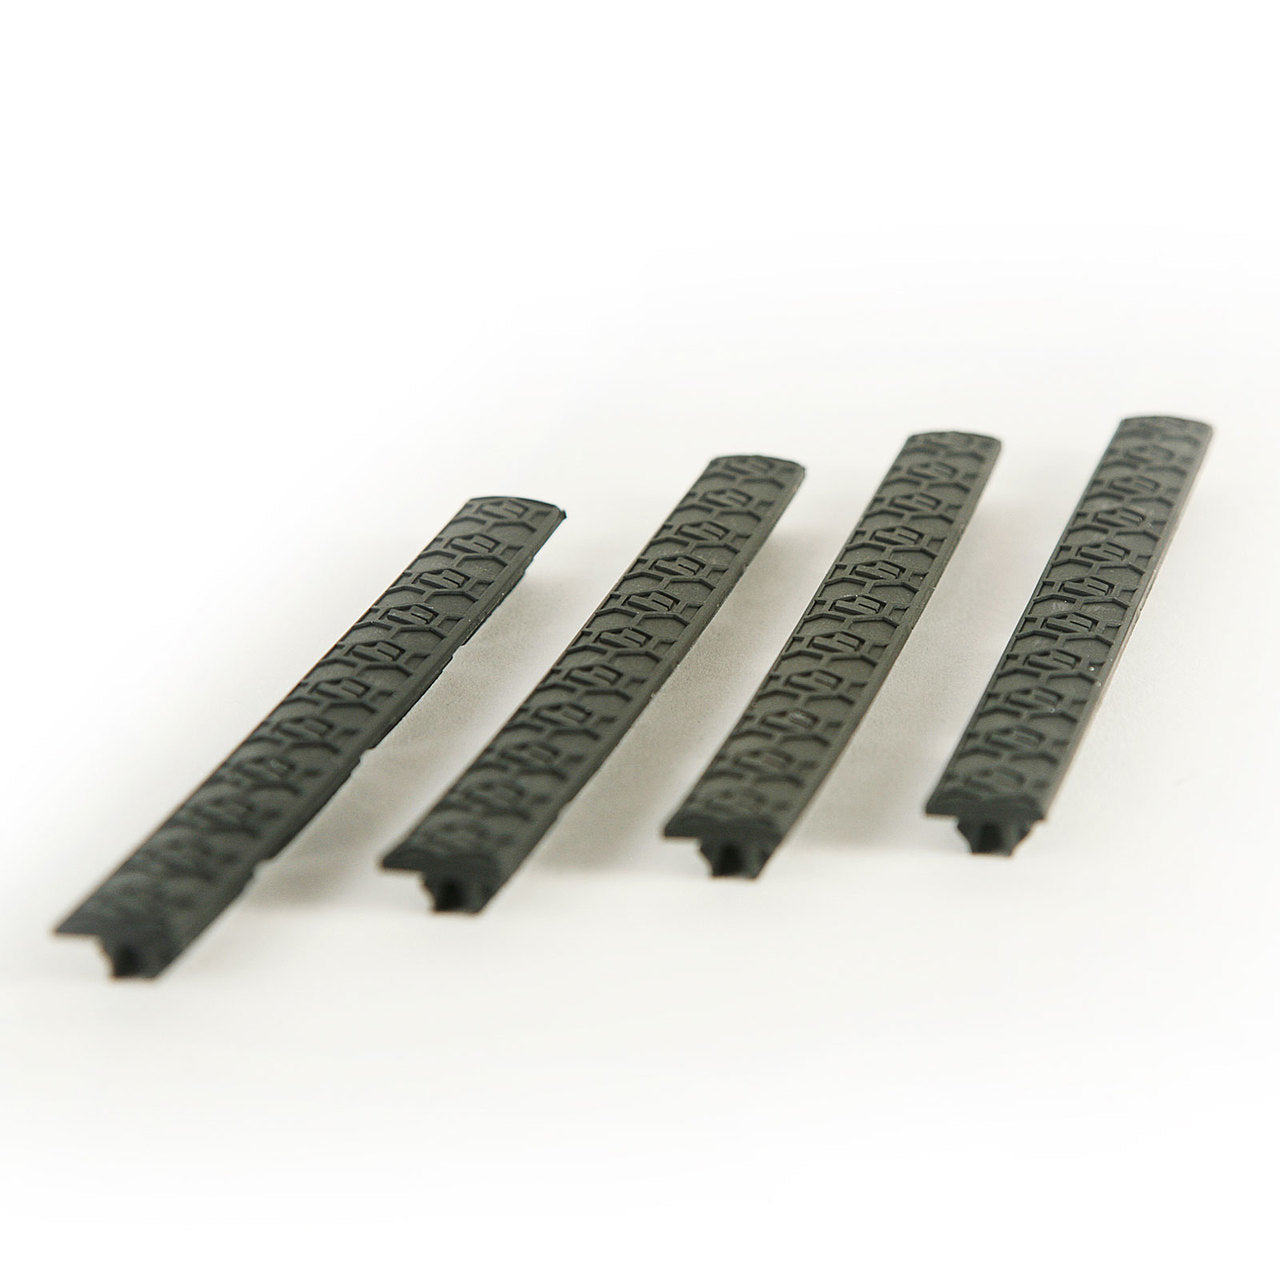 Hexmag Hexmag M-LOK Rail Cover (4 Pack) - Newest Products